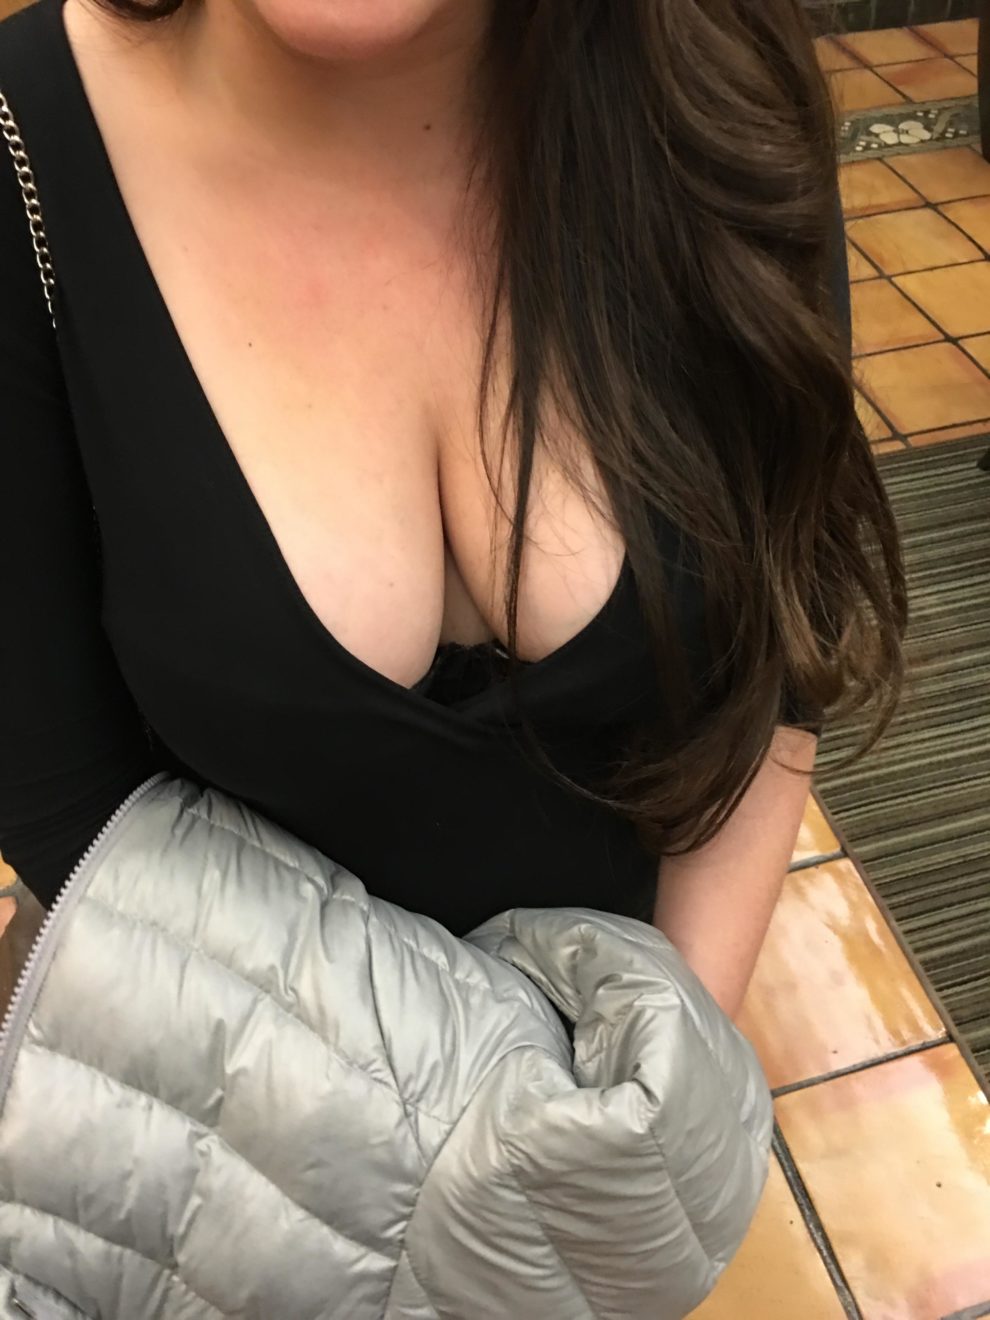 Another angle of my cleavage. More? [F]